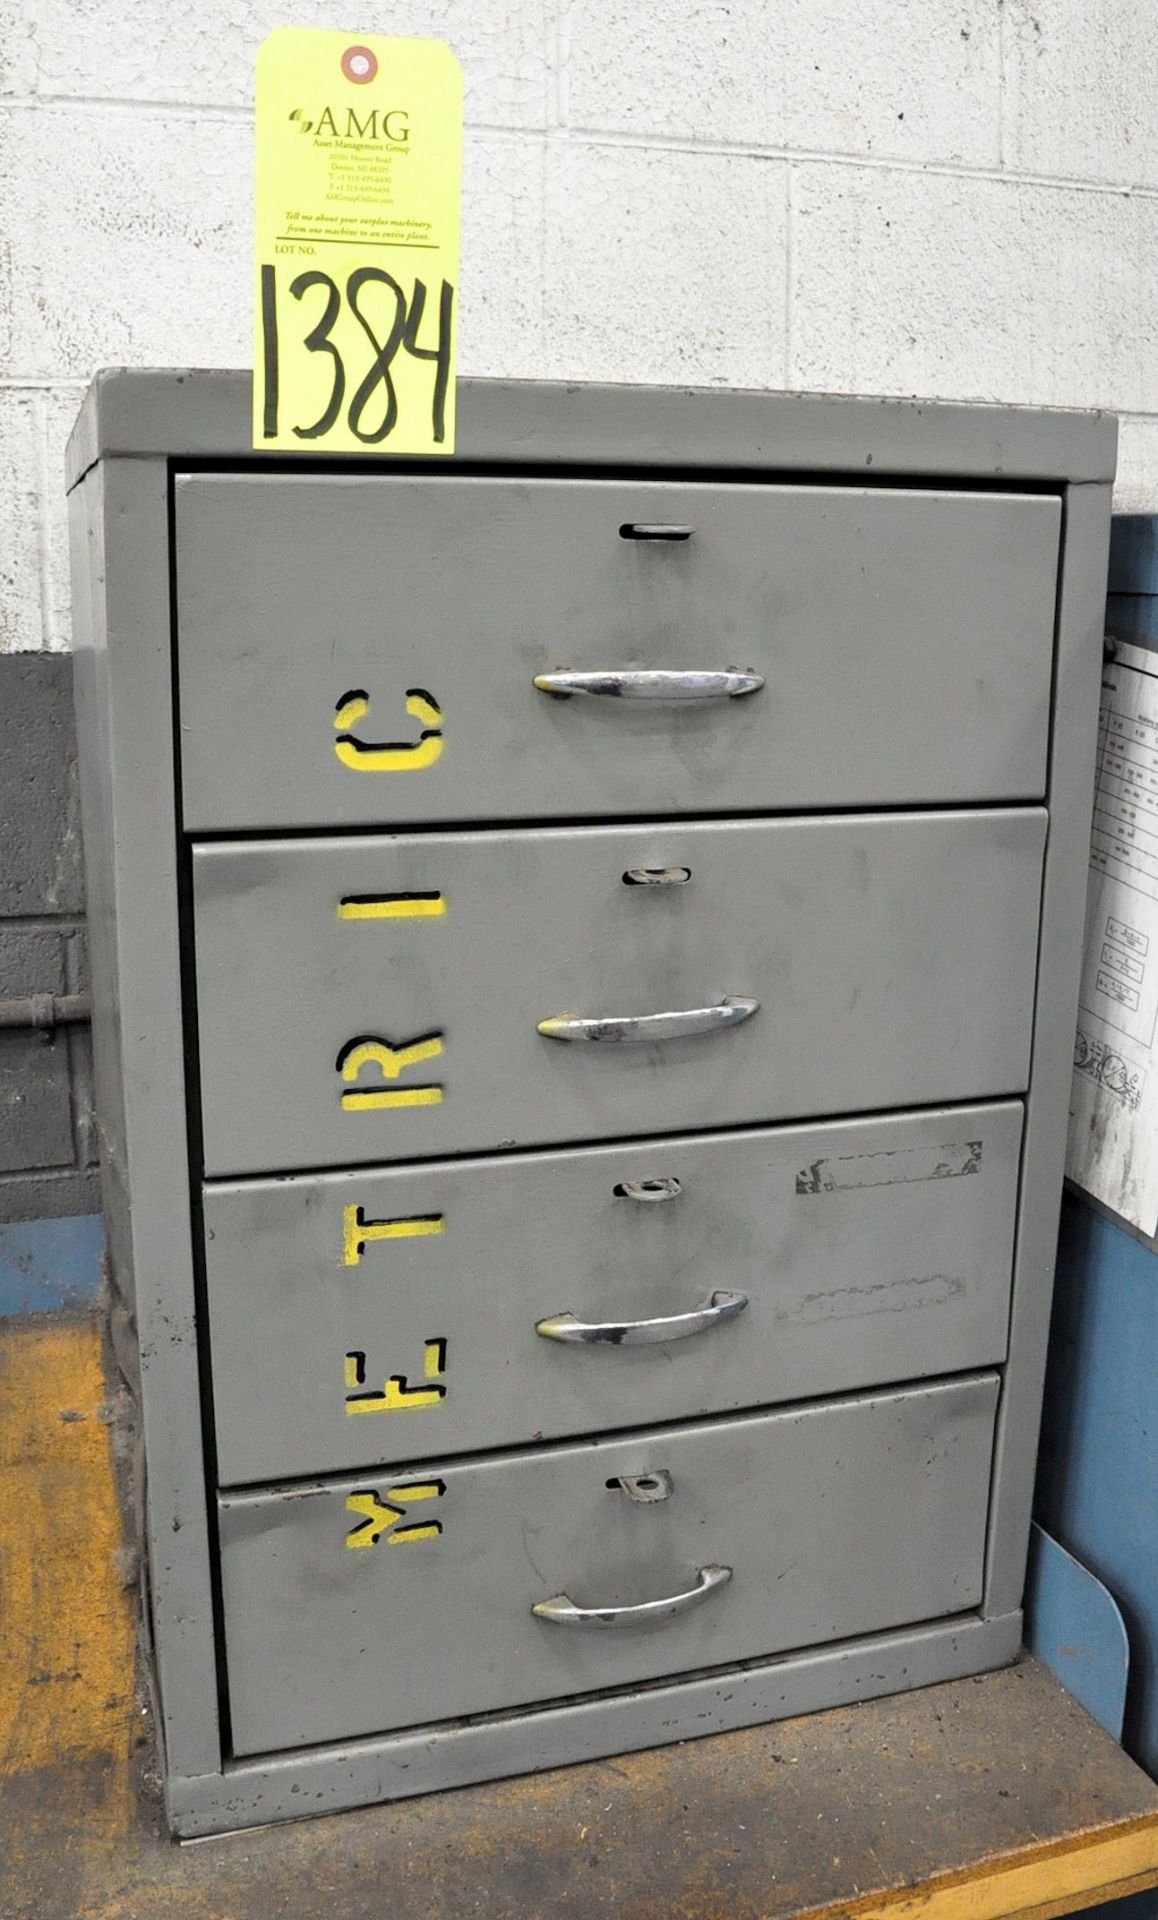 Lot-(1) 4-Drawer Cabinet with Various Metric Cutters and Inserts Contents, (A-24), (Yellow Tag)